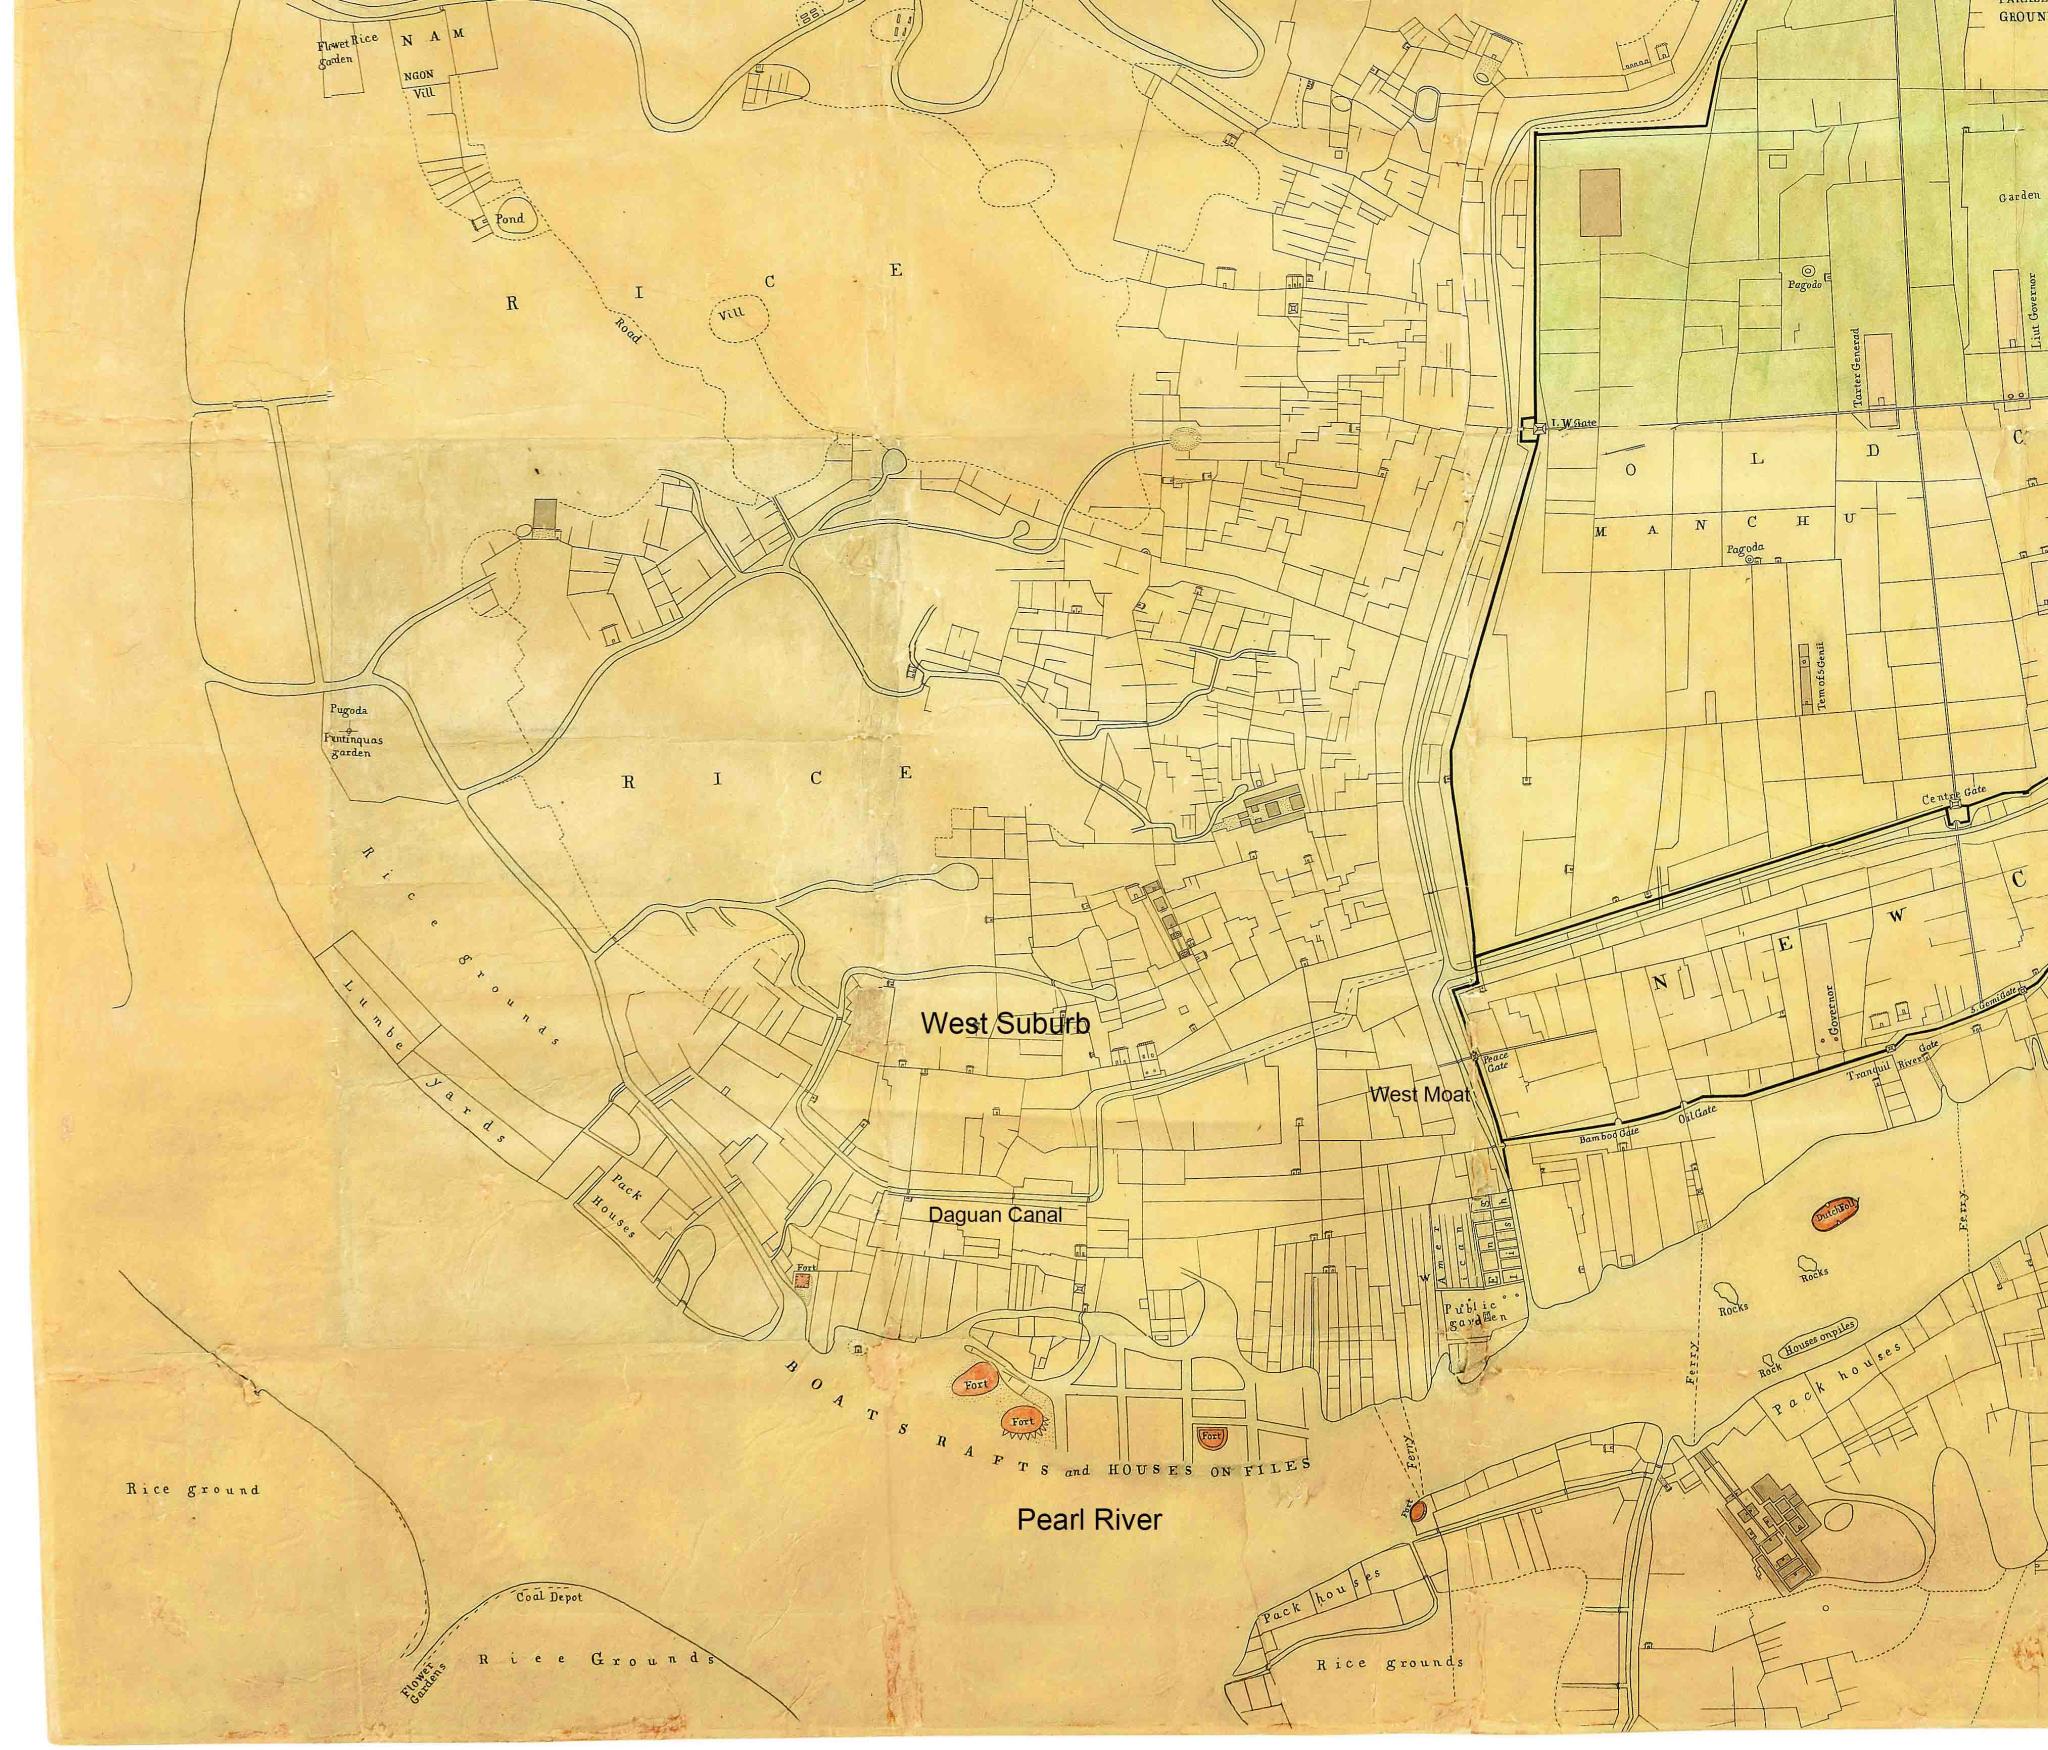 historic map of Canton showing the location of Daguan canal